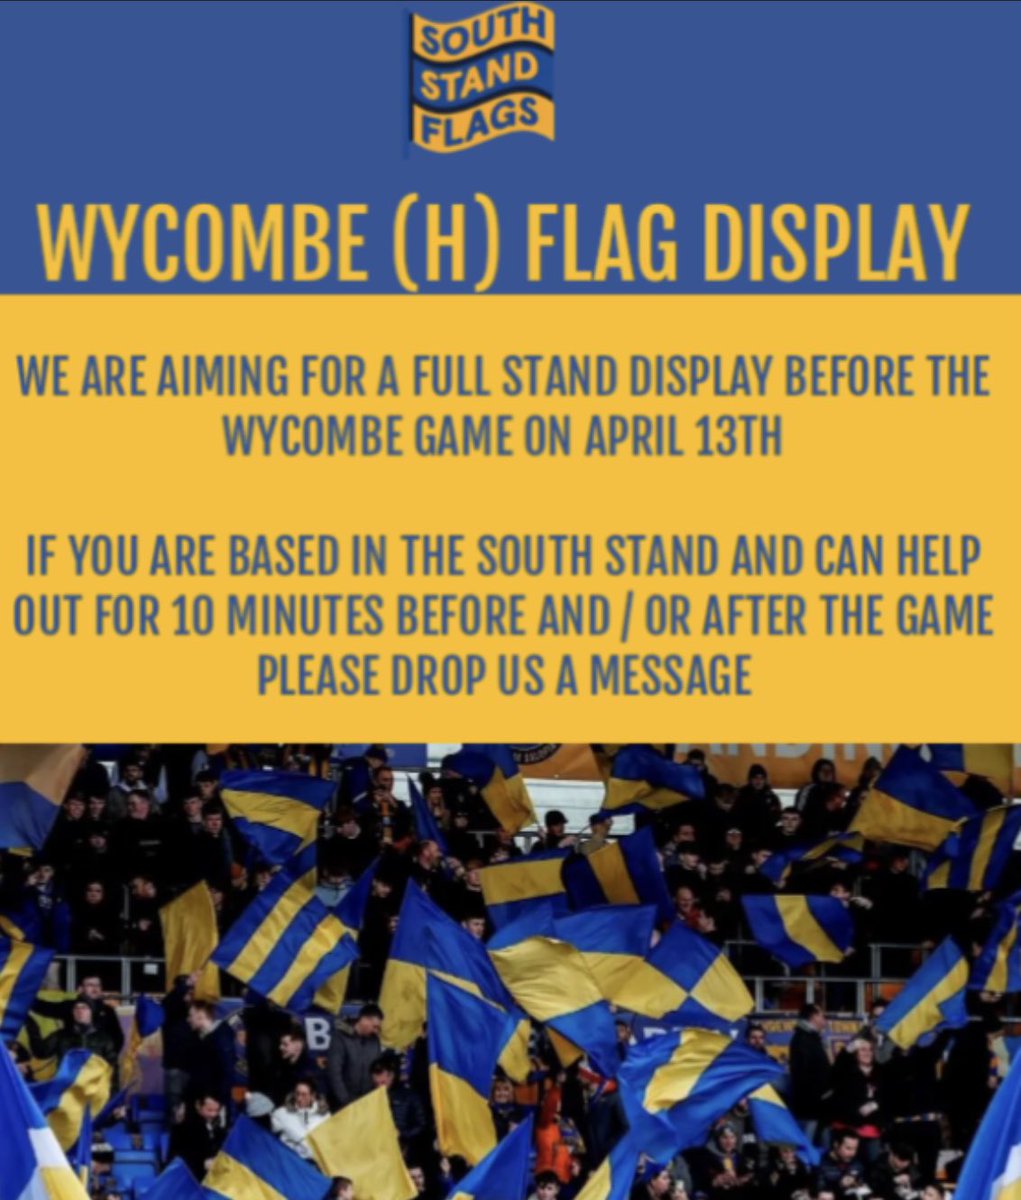 We are planning a full stand display on Saturday, but we need more people getting involved to make these happen. Drop us a message if you can help. Newcomers are welcome. Let’s play our part in getting them over the line. #Salop